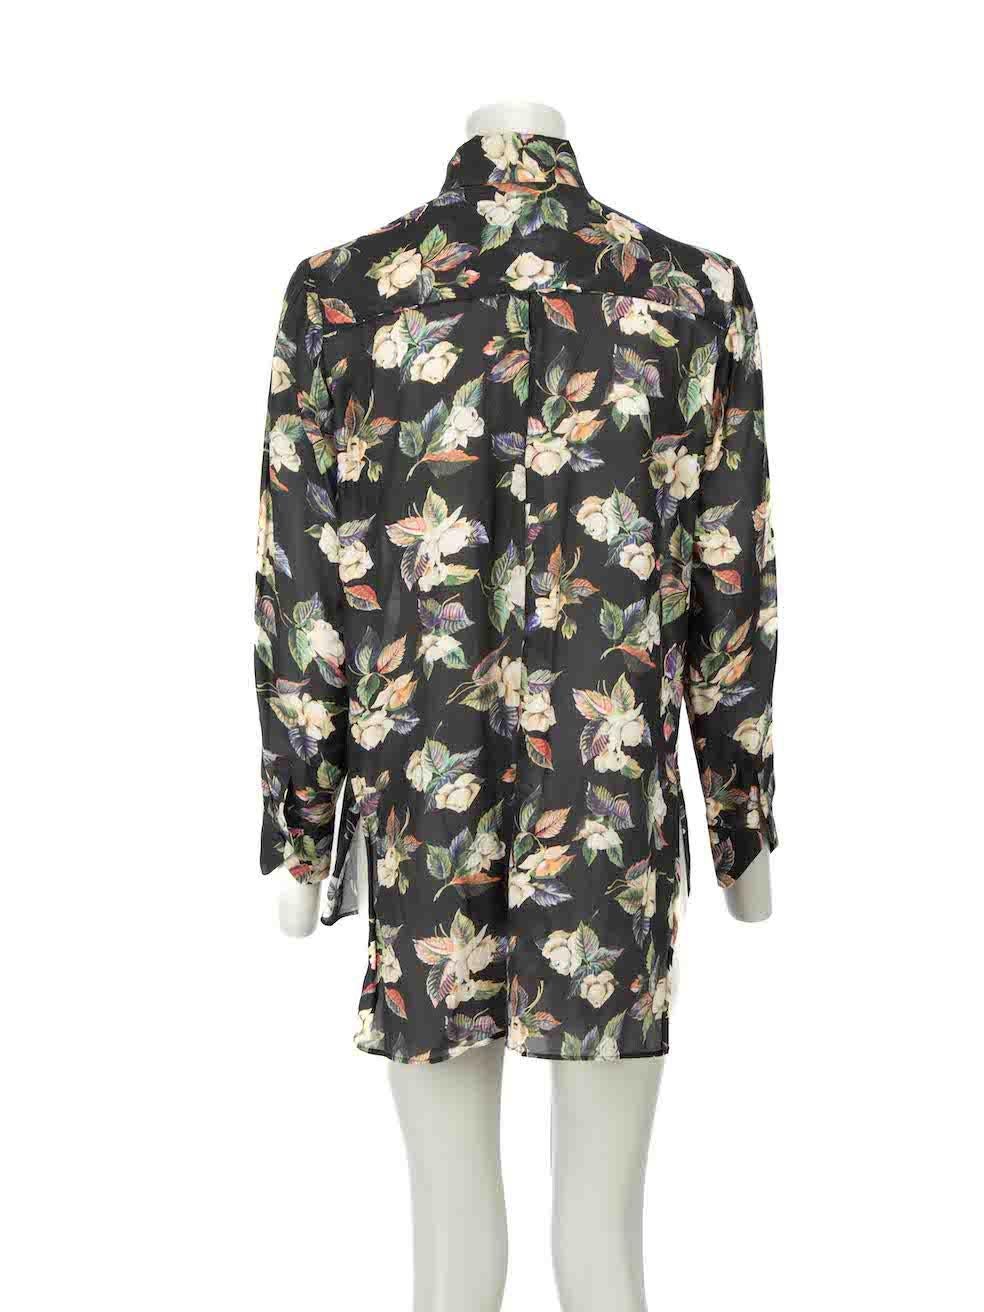 Vilshenko Floral Print Sheer Blouse Size M In Excellent Condition For Sale In London, GB